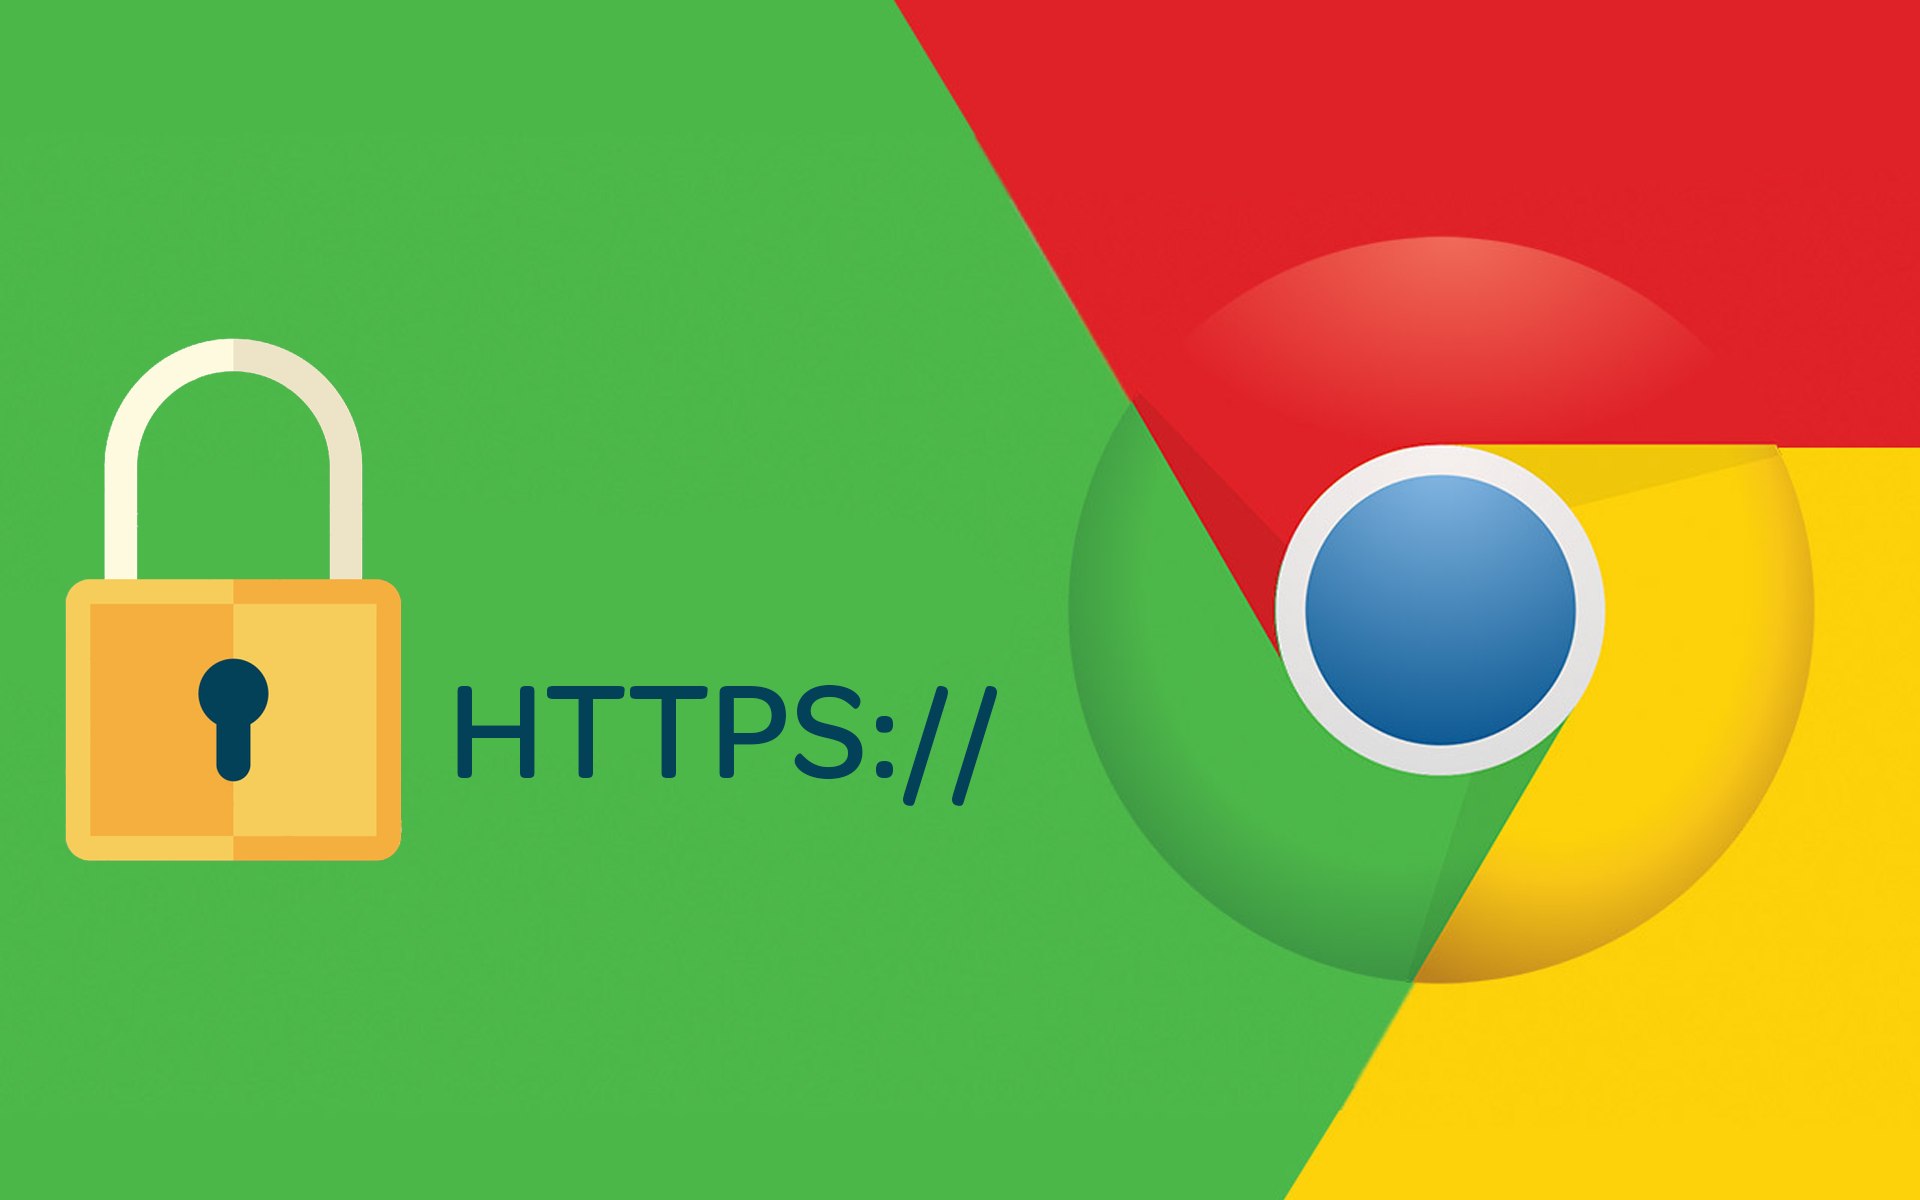 Https security google. Https://about:blank#blocked.